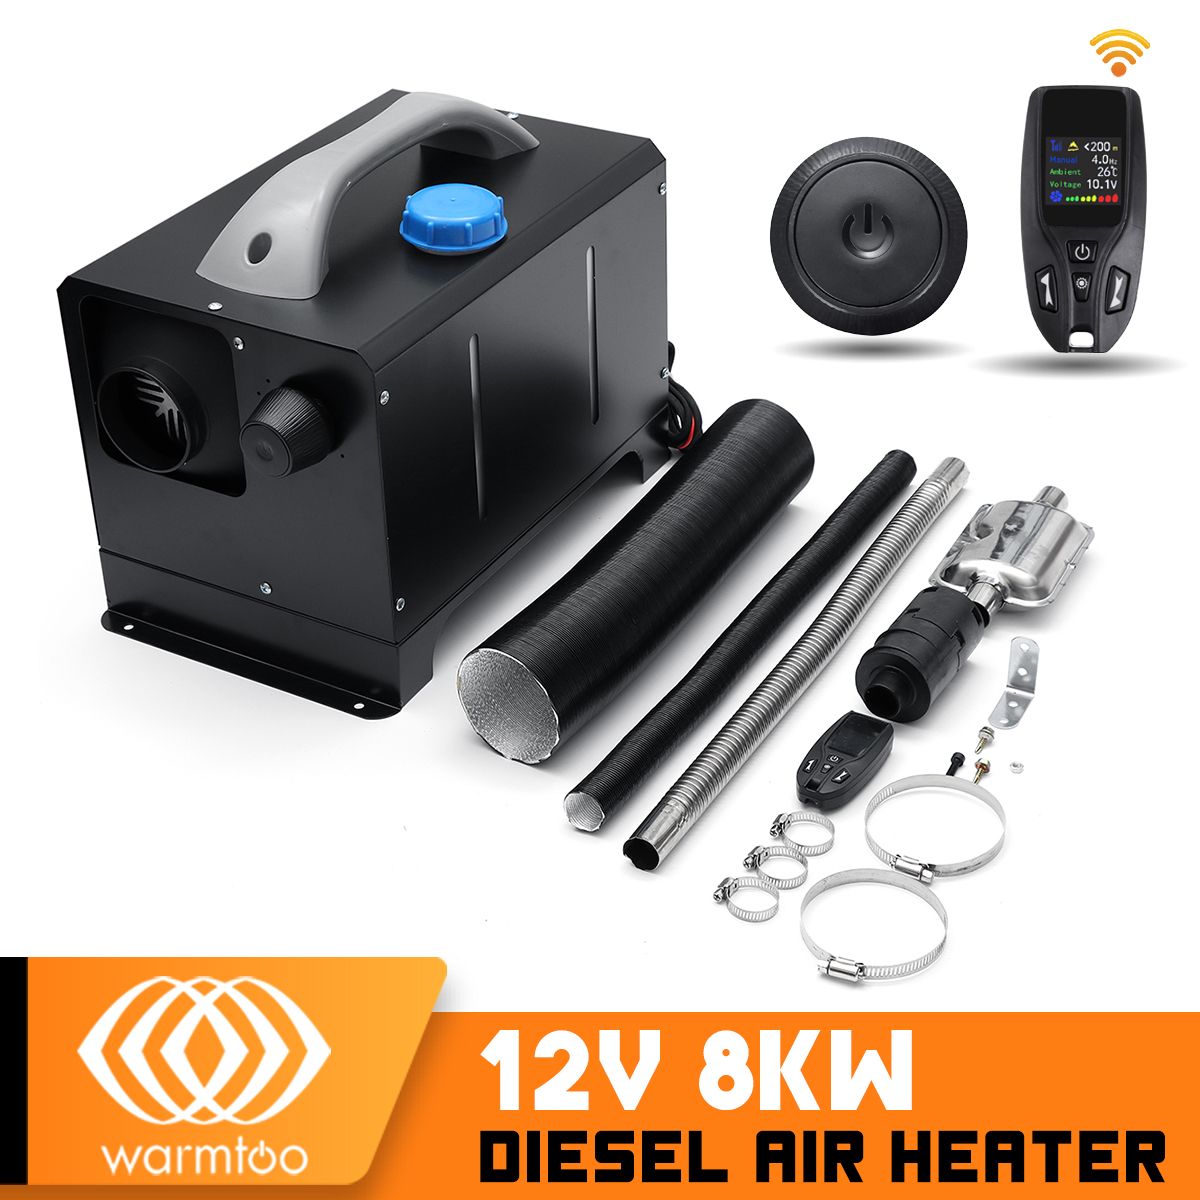 Warmtoo-12V-8KW-Car-Parking-Heater-All-in-one-Diesel-Air-Heater-Remote-Control-1723780